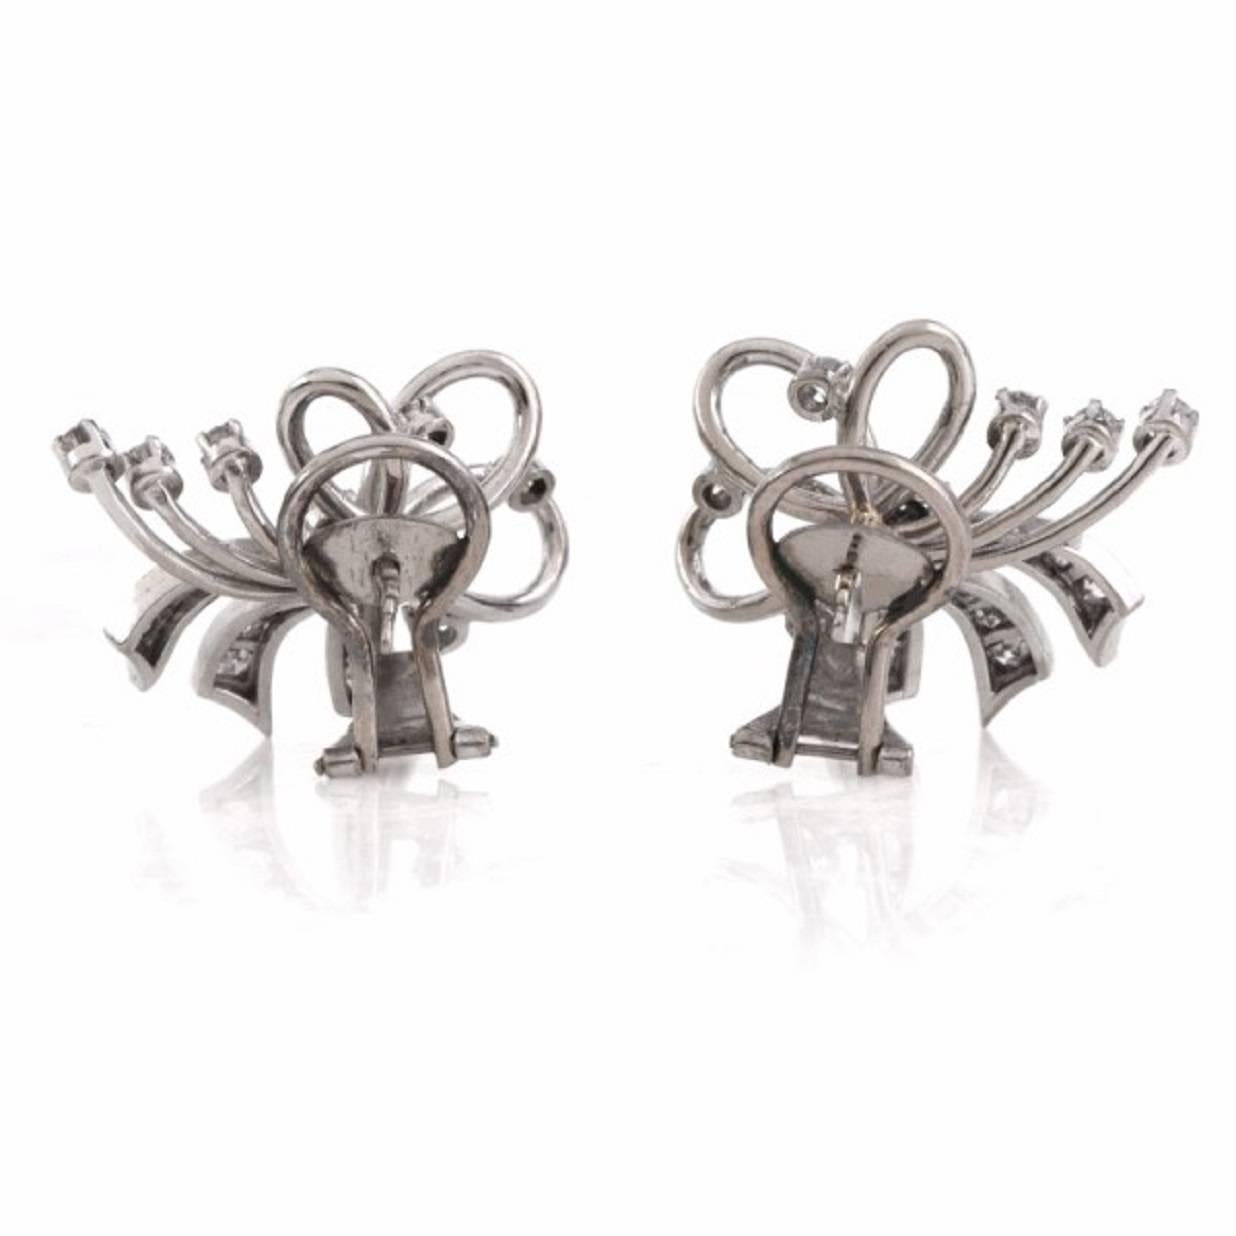 These enchanting vintage earrings depicting well designed swirl ribbon bow profiles are crafted in solid 18K white gold, weighing 9.6 grams and measuring 22 x 19 mm.These refined earrings of alluring monochromatic aesthetic are adorned with a total